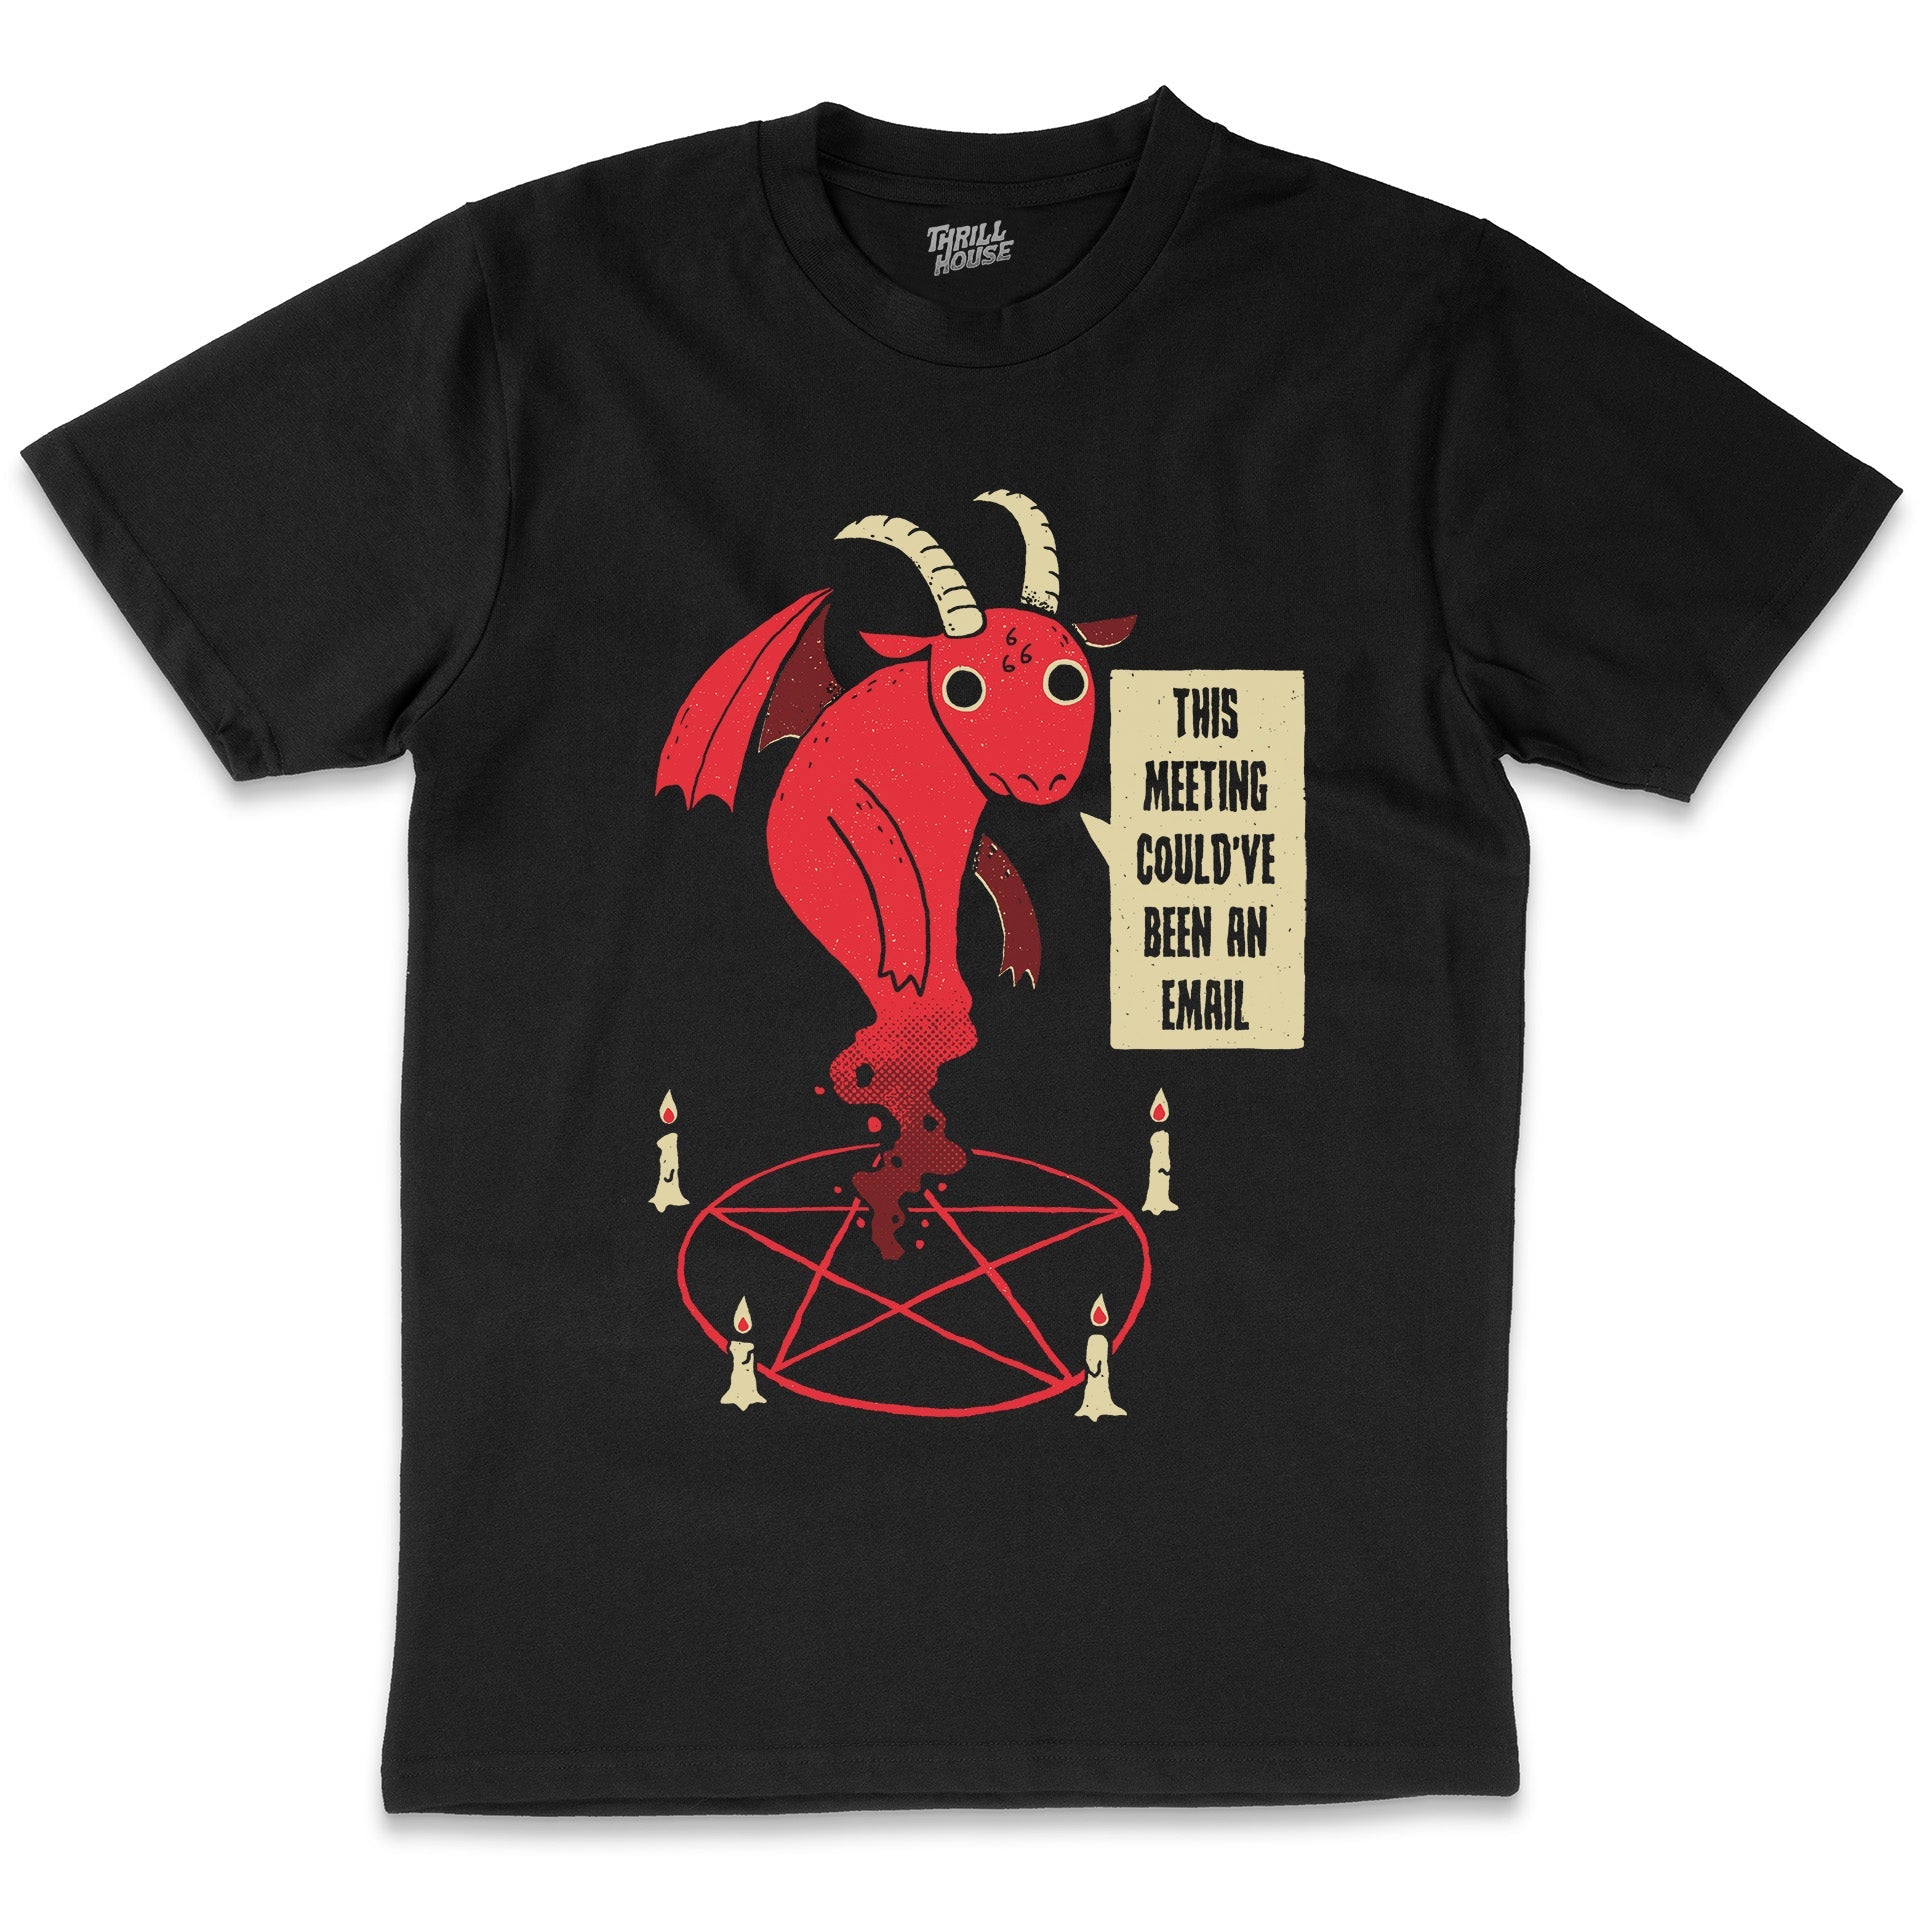 Could Have Been An Email Demonic Demon Dark Humour Sarcastic Anti-Social Cotton T-Shirt